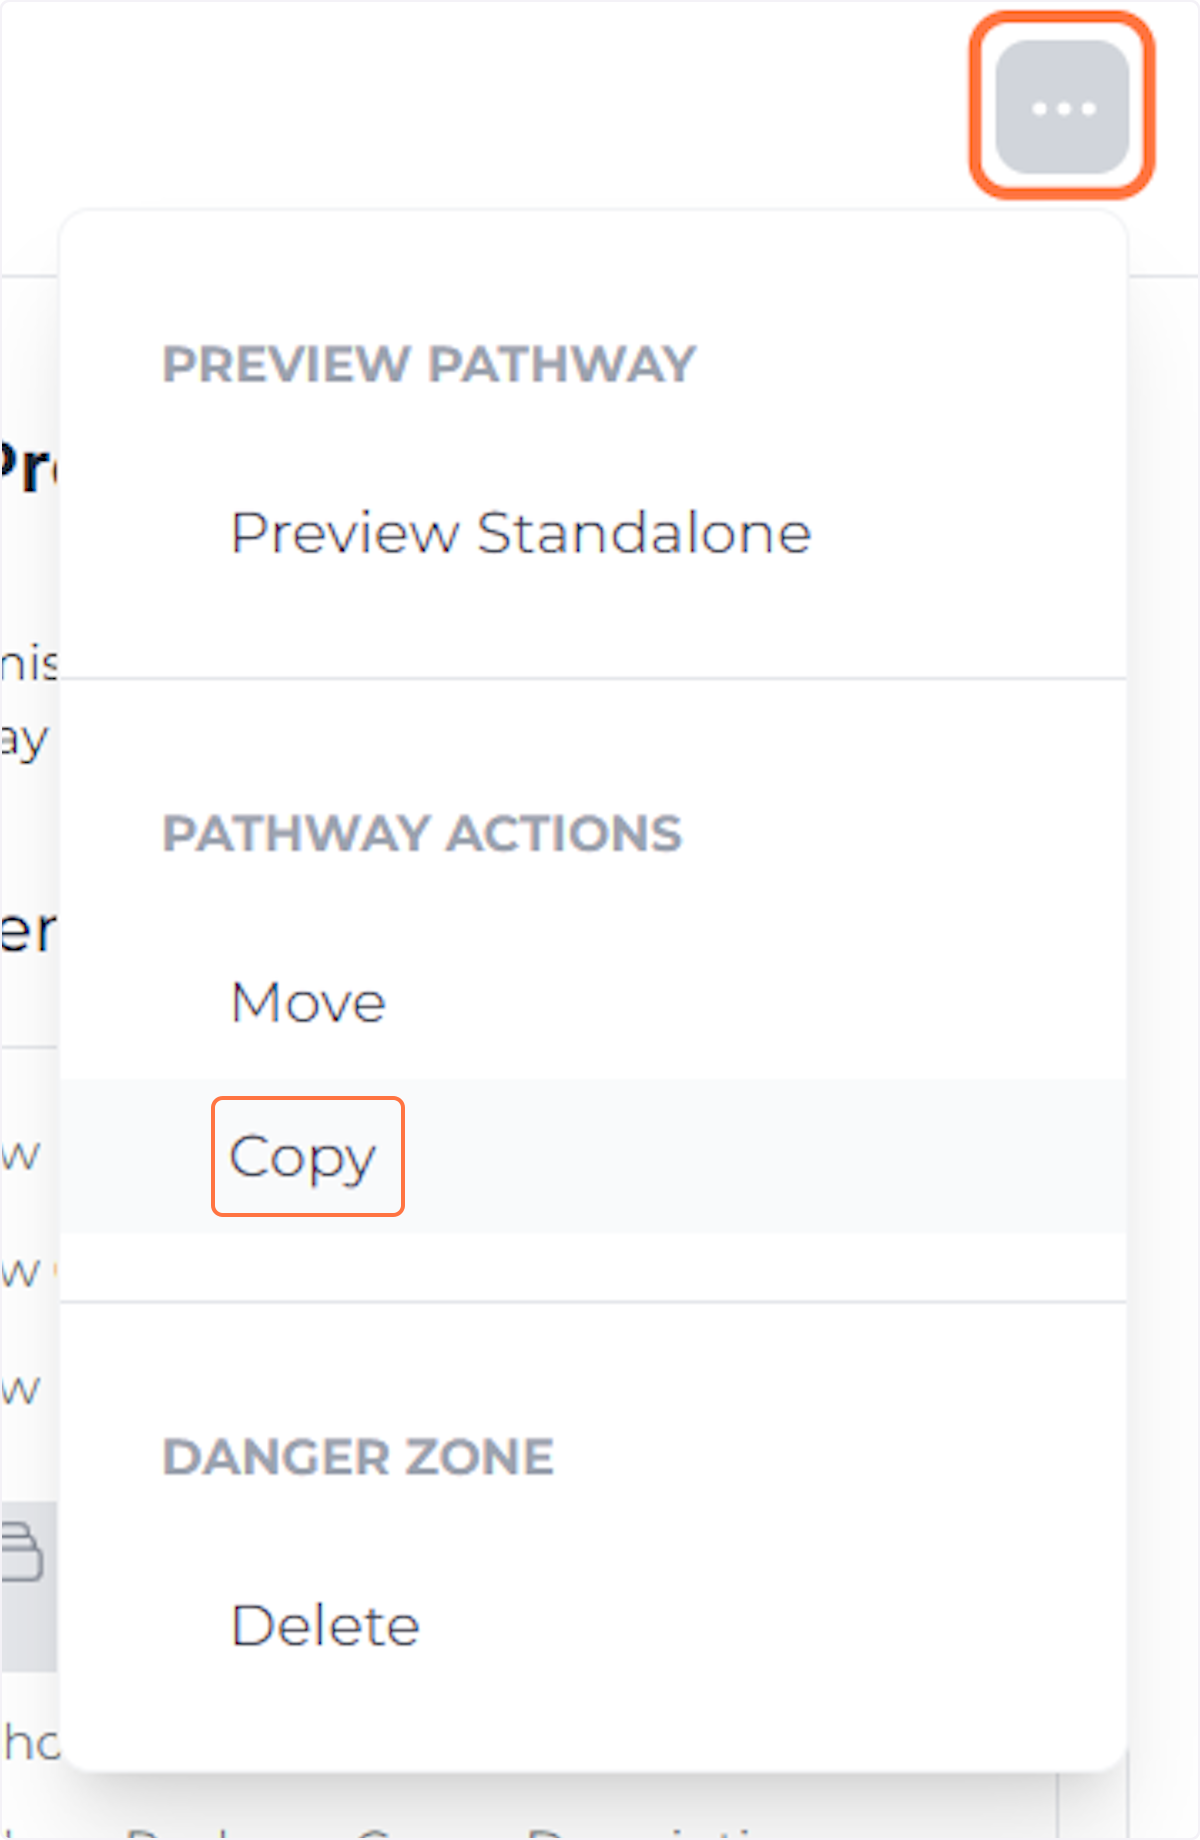 Open the 'Pathway Actions' menu, and click 'Copy'.